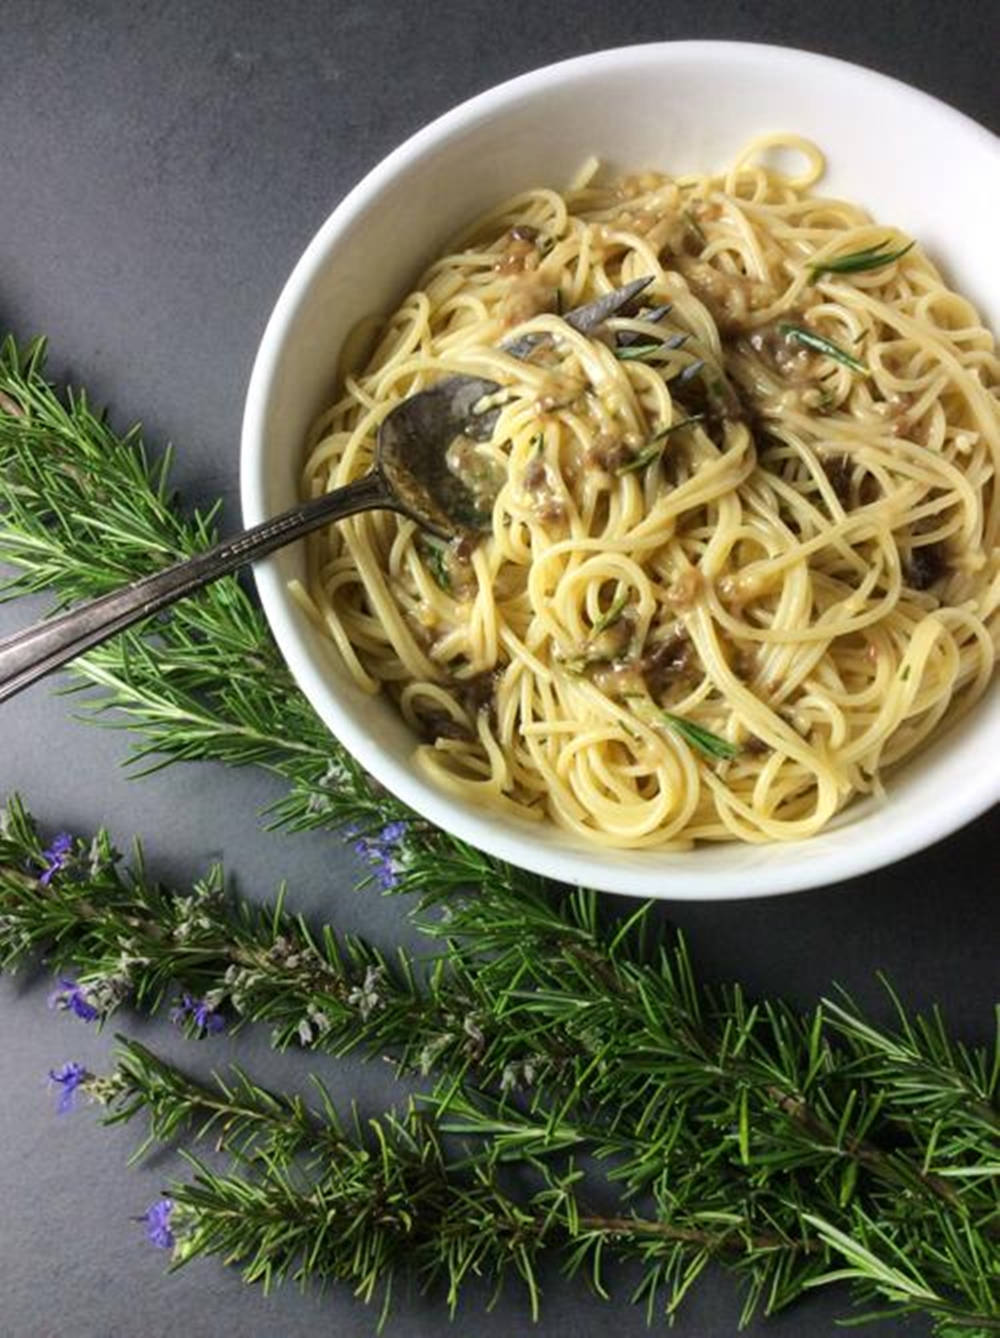 Rosemary With Noodle Bowl Wallpaper